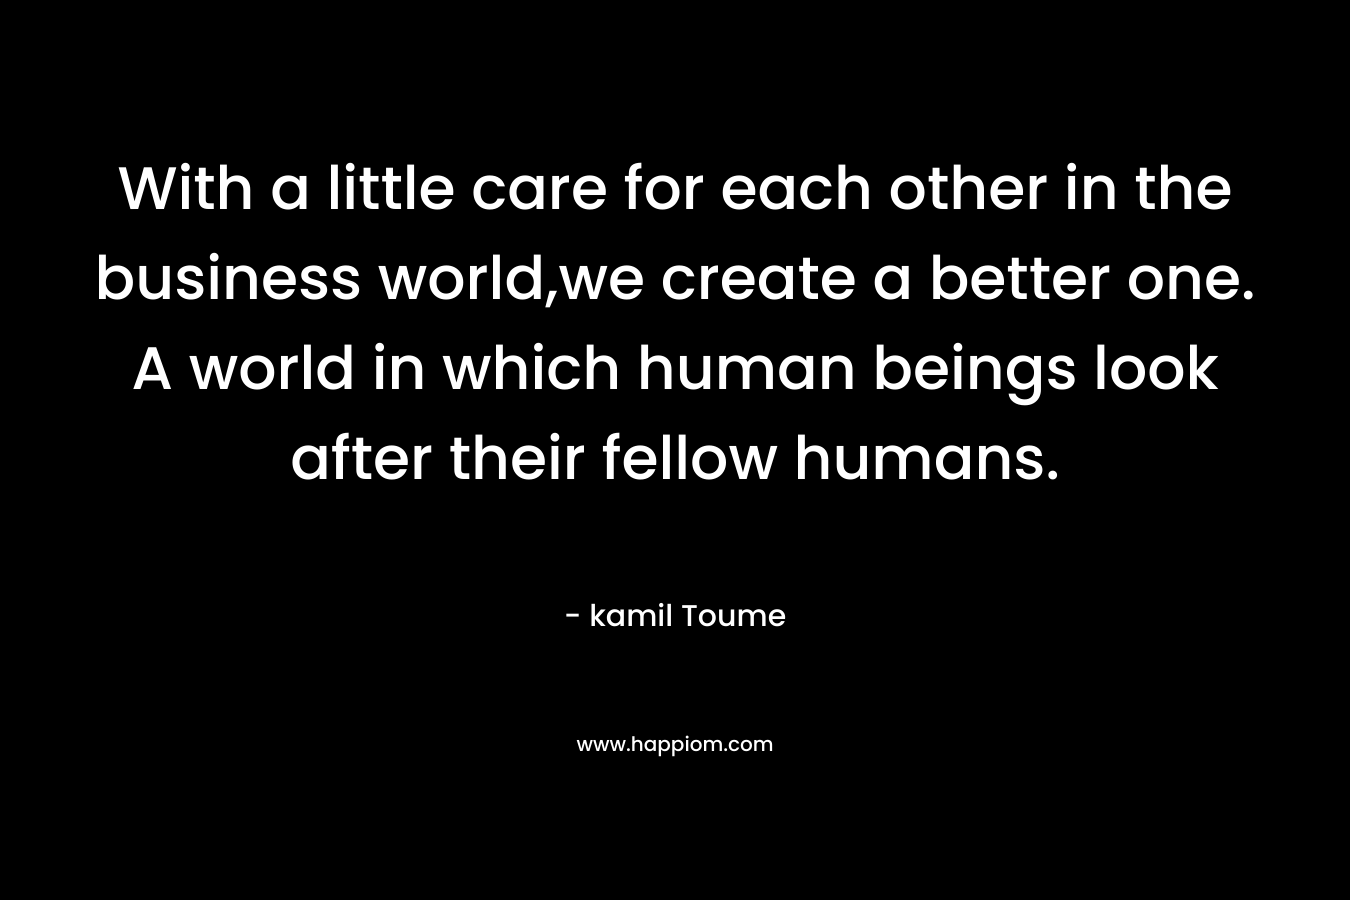 With a little care for each other in the business world,we create a better one. A world in which human beings look after their fellow humans. – kamil Toume